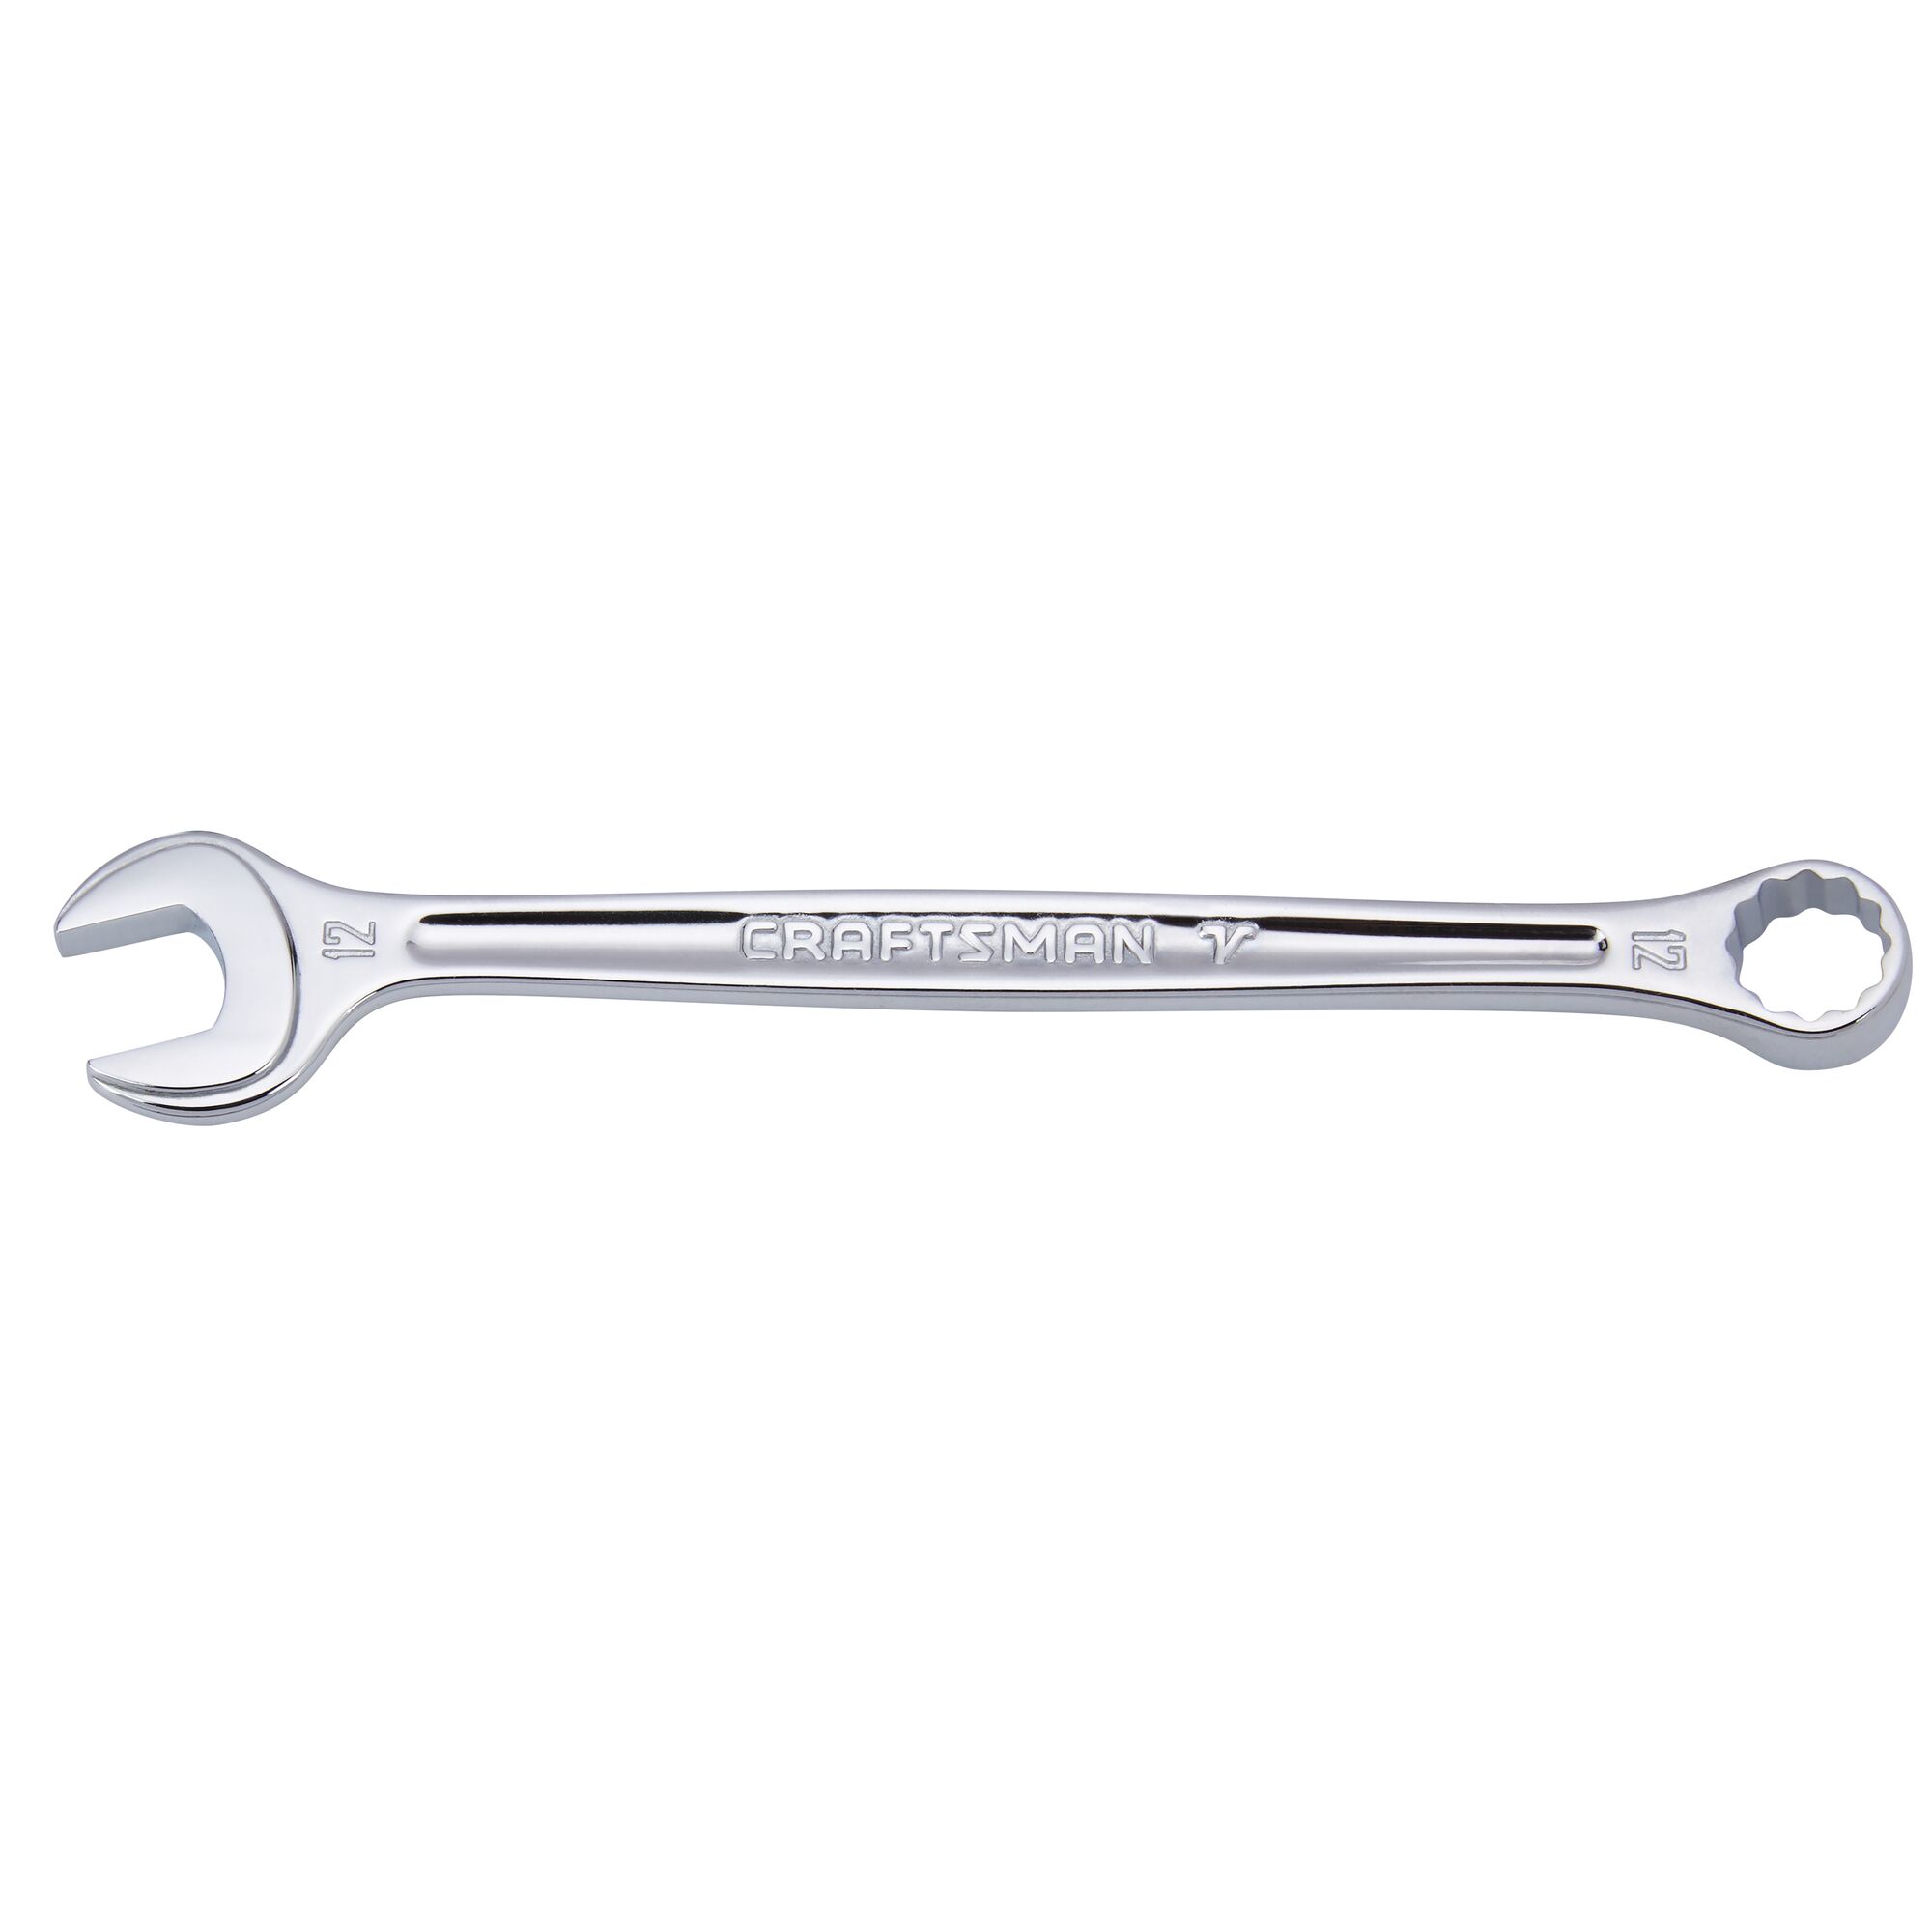 CRAFTSMAN V-SERIES Combo Wrench 12MM 